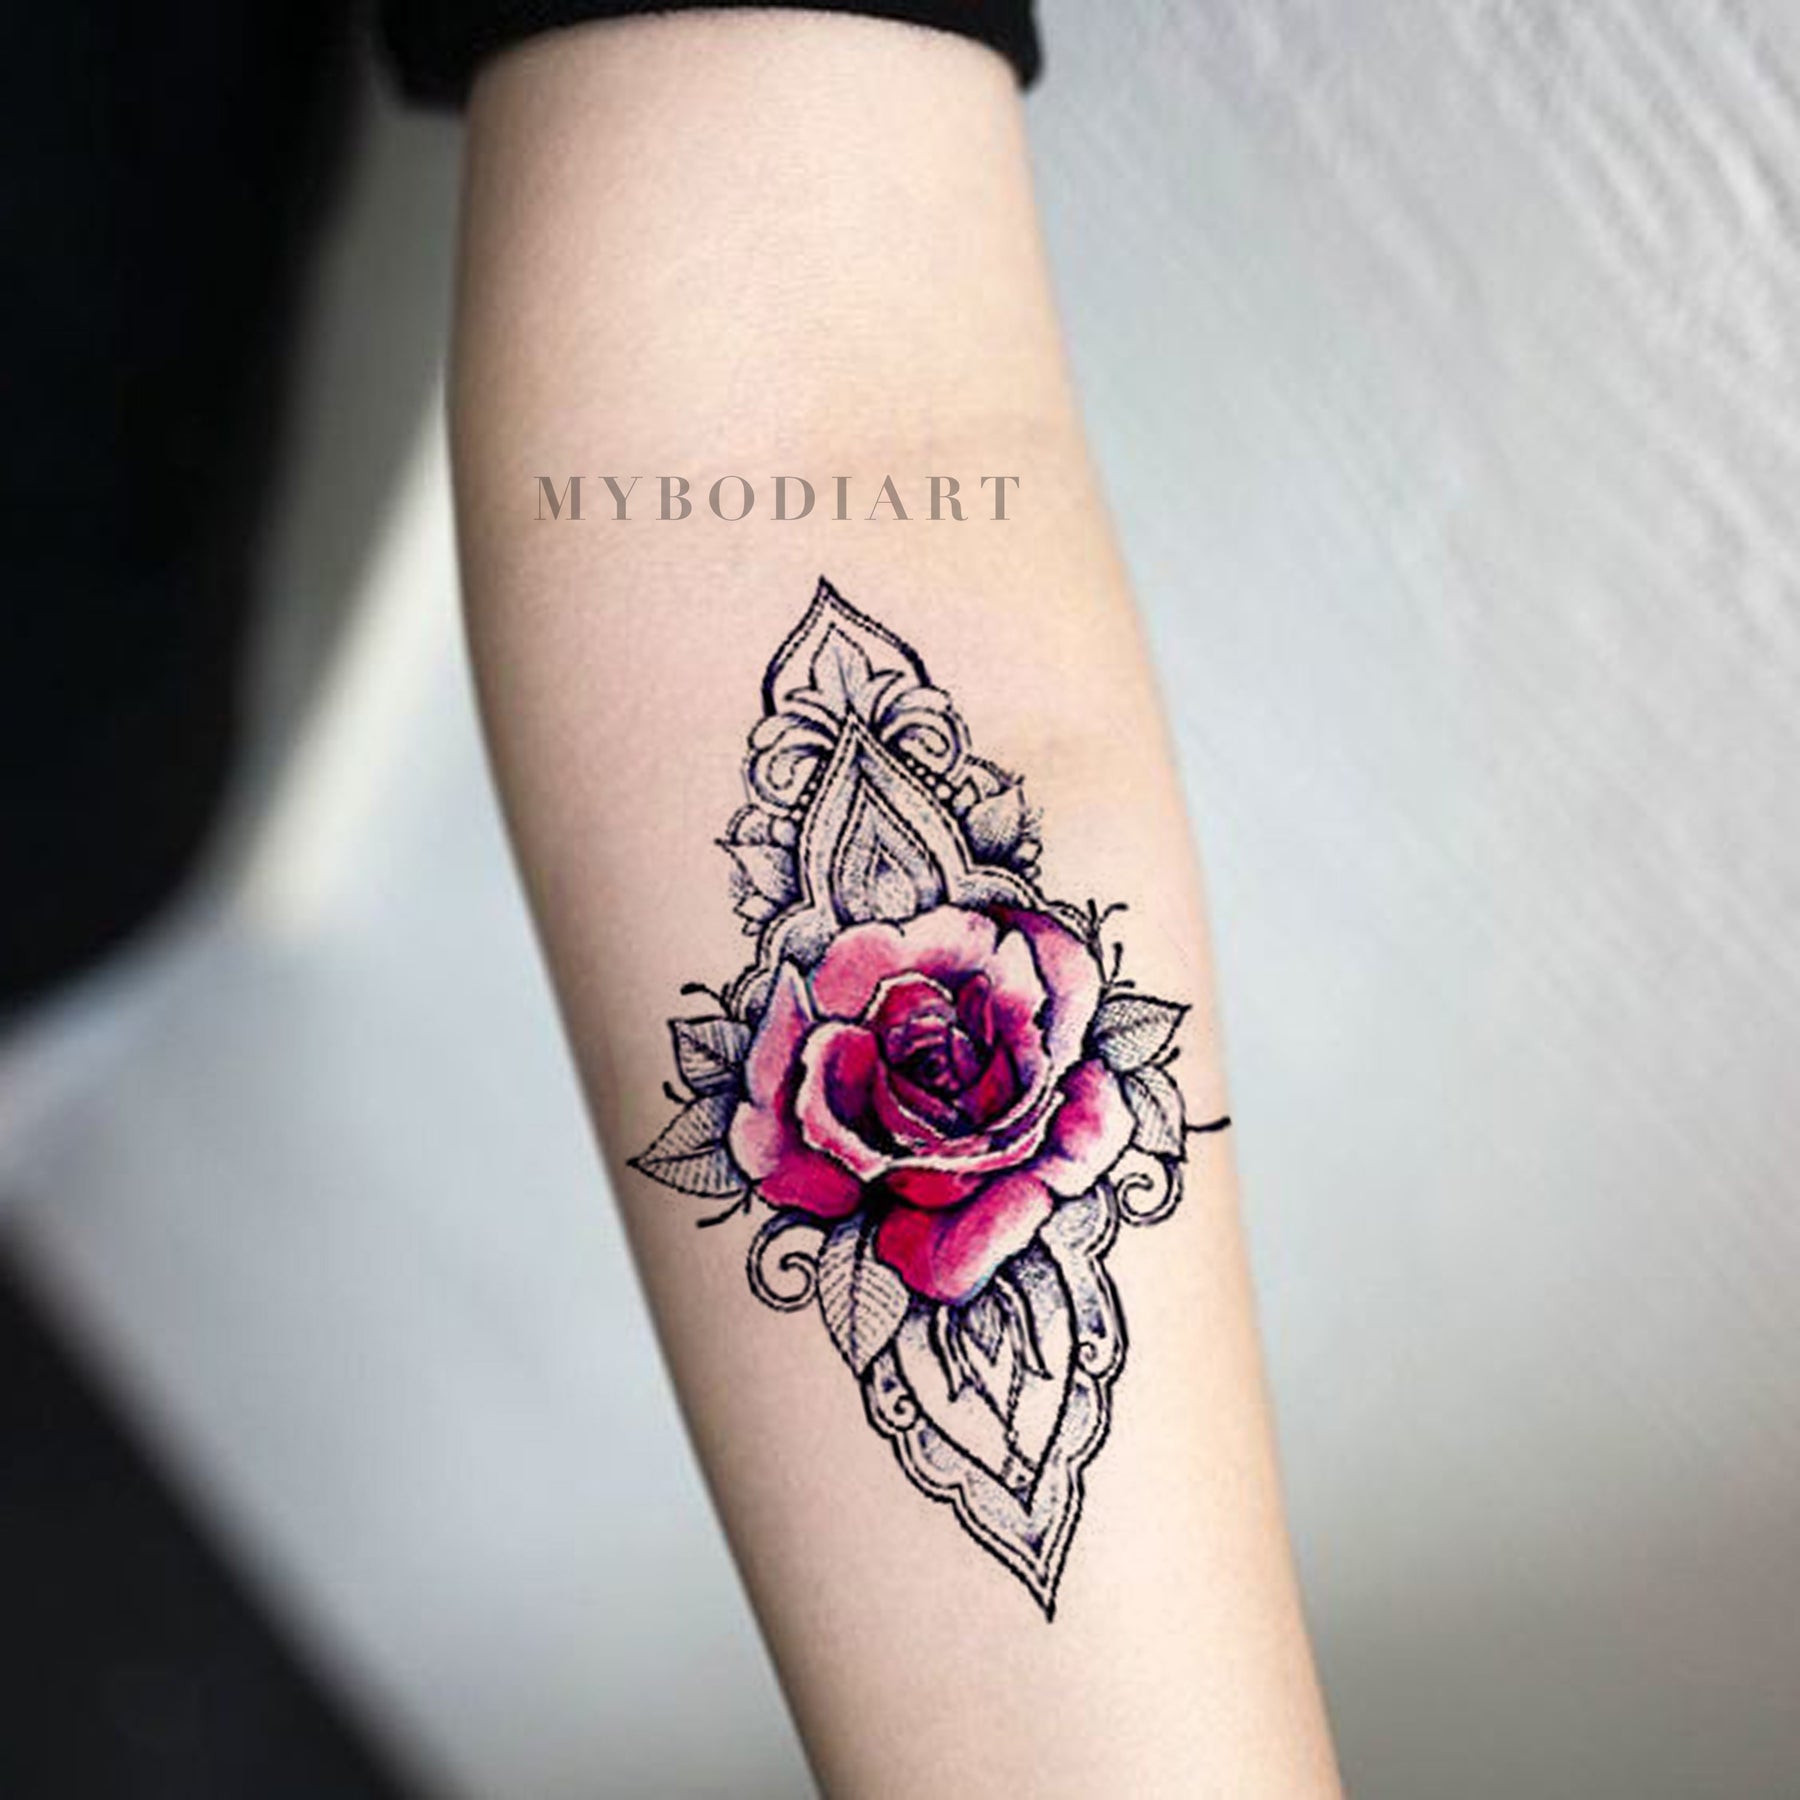 96 Exquisite Geometric Tattoos To Outline Your Creativity | Bored Panda